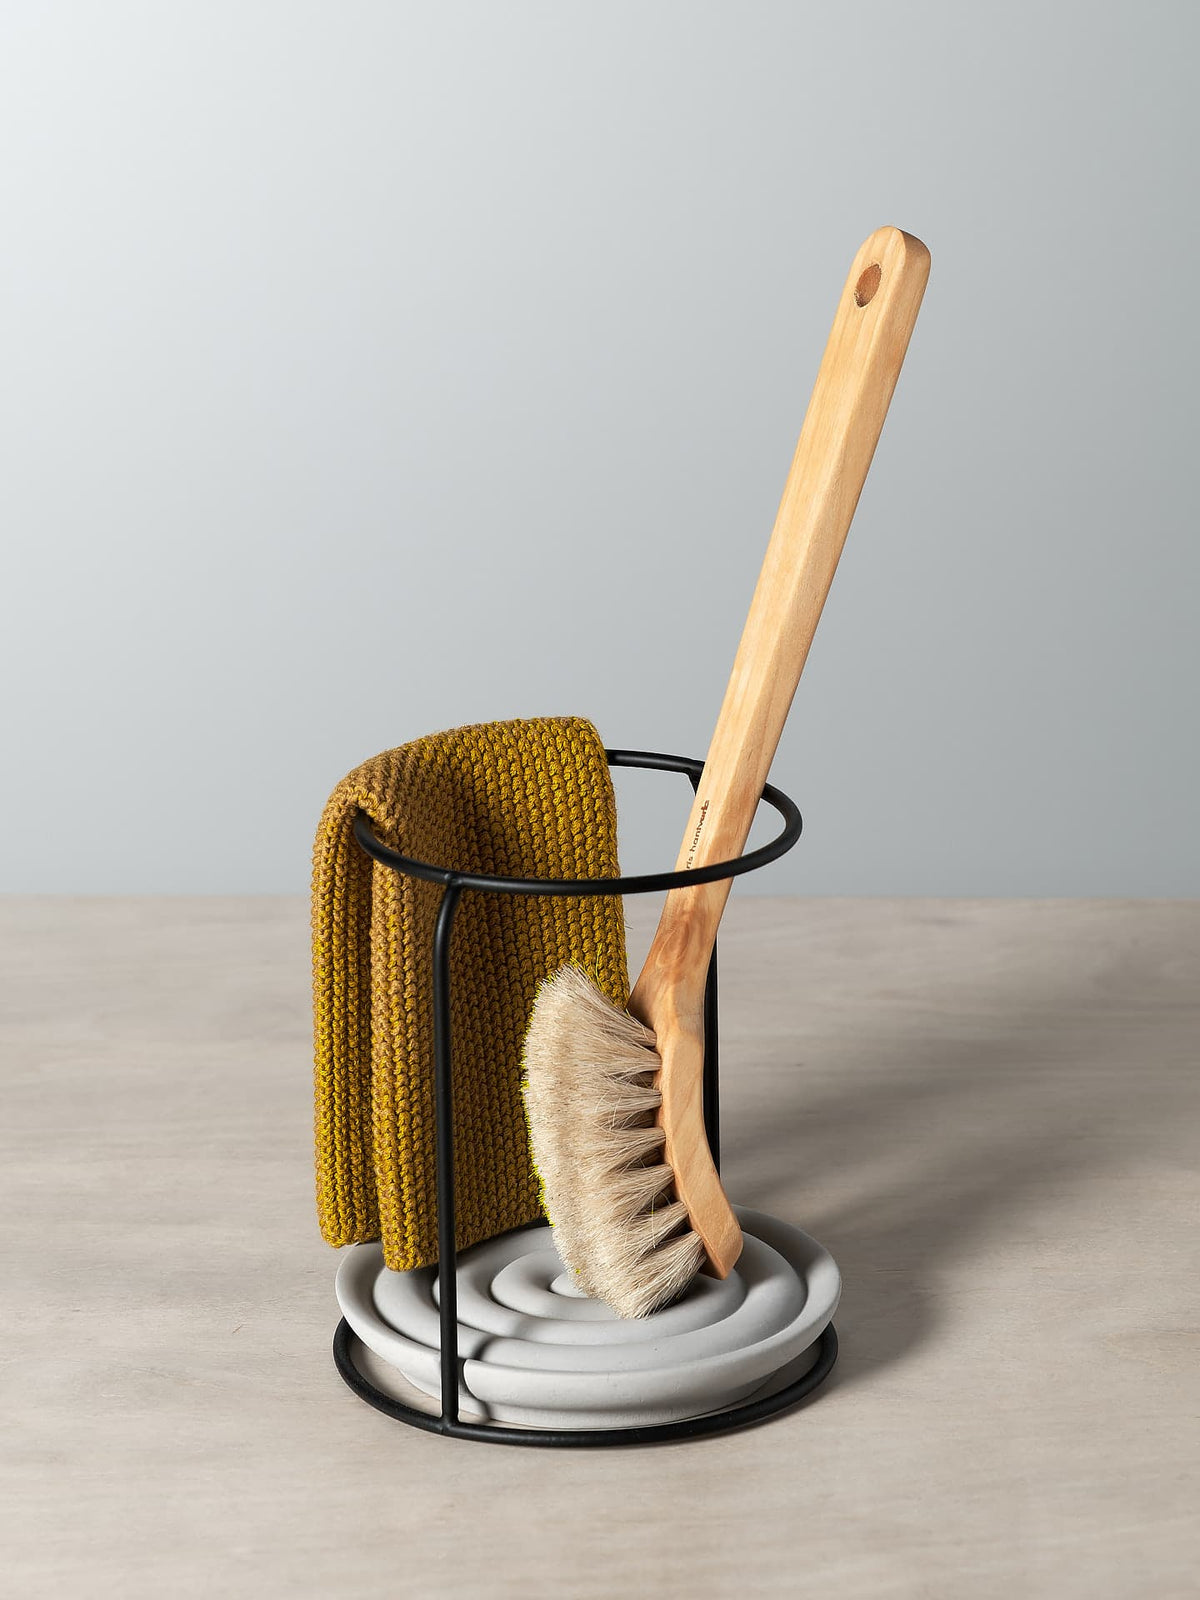 A Dish Brush Holder with a mustard colour cloth and wooden brush, all by Iris Hantverk.